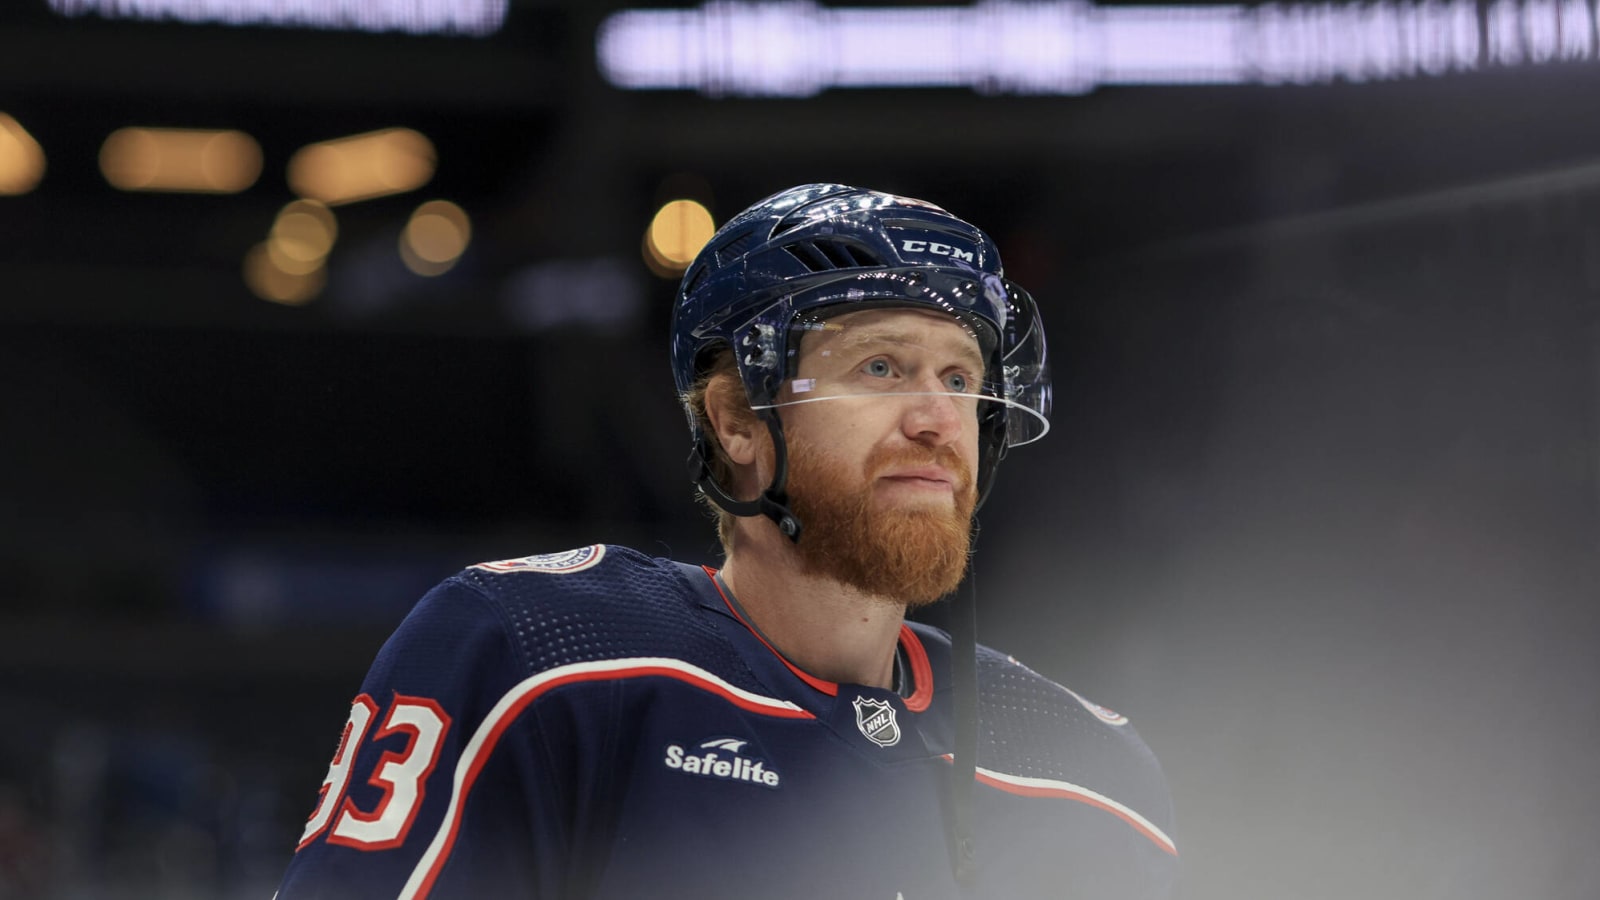 Blue Jackets' Jakub Voracek, two others out indefinitely with injuries